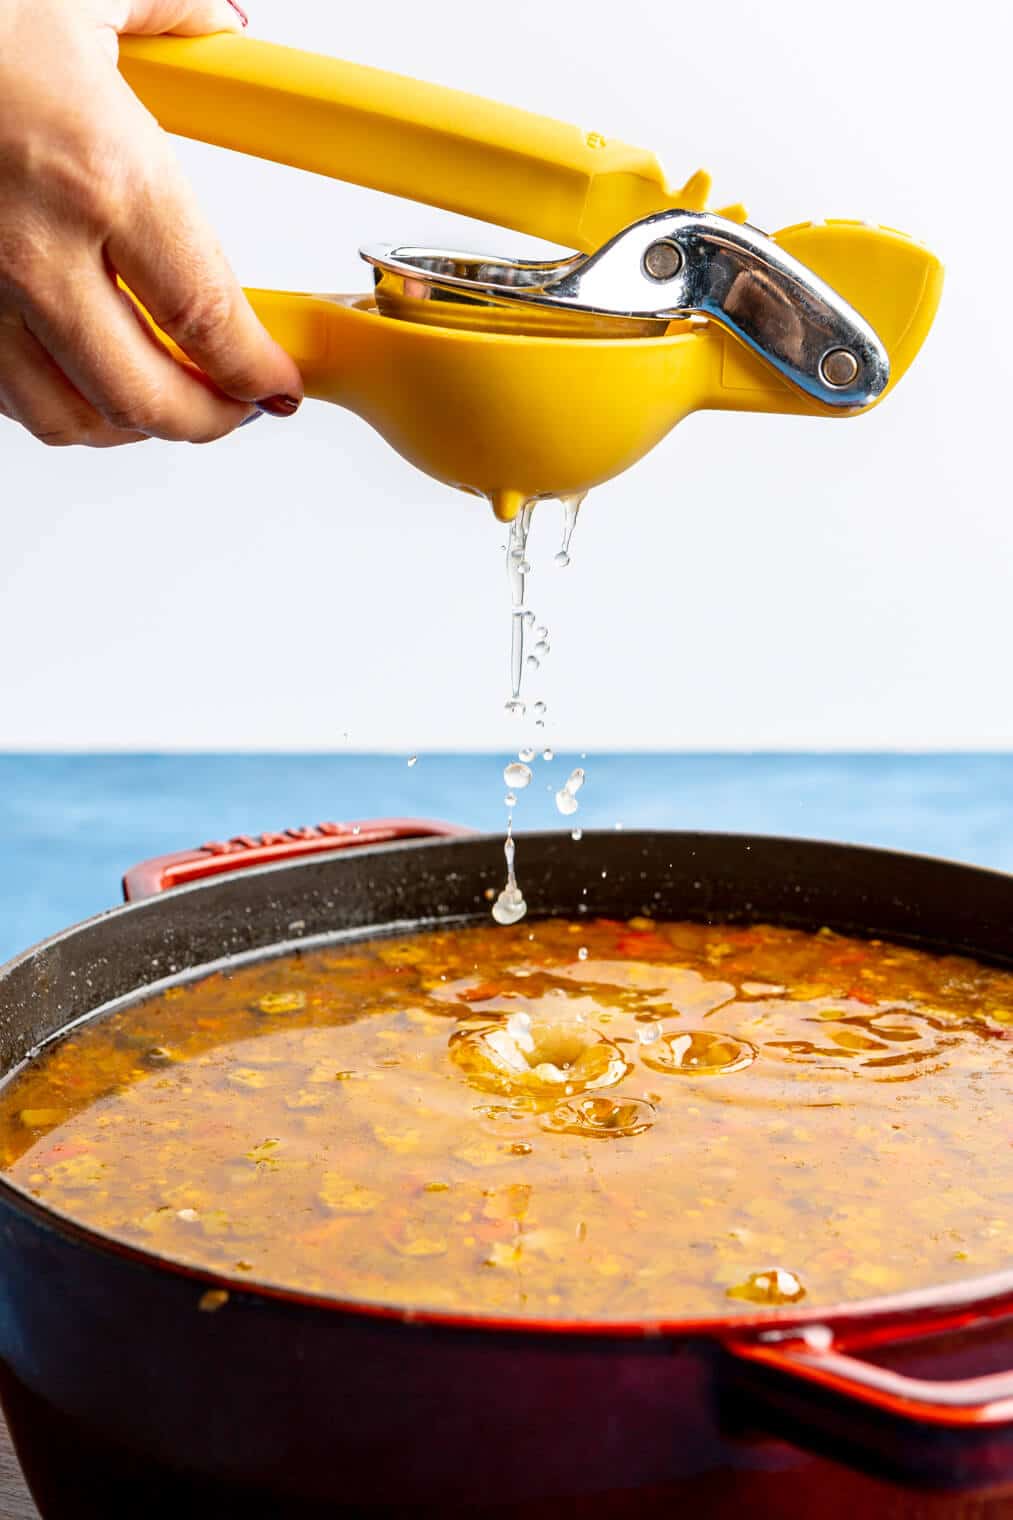 Lemon juice being squeezed over top a pot of gumbo.